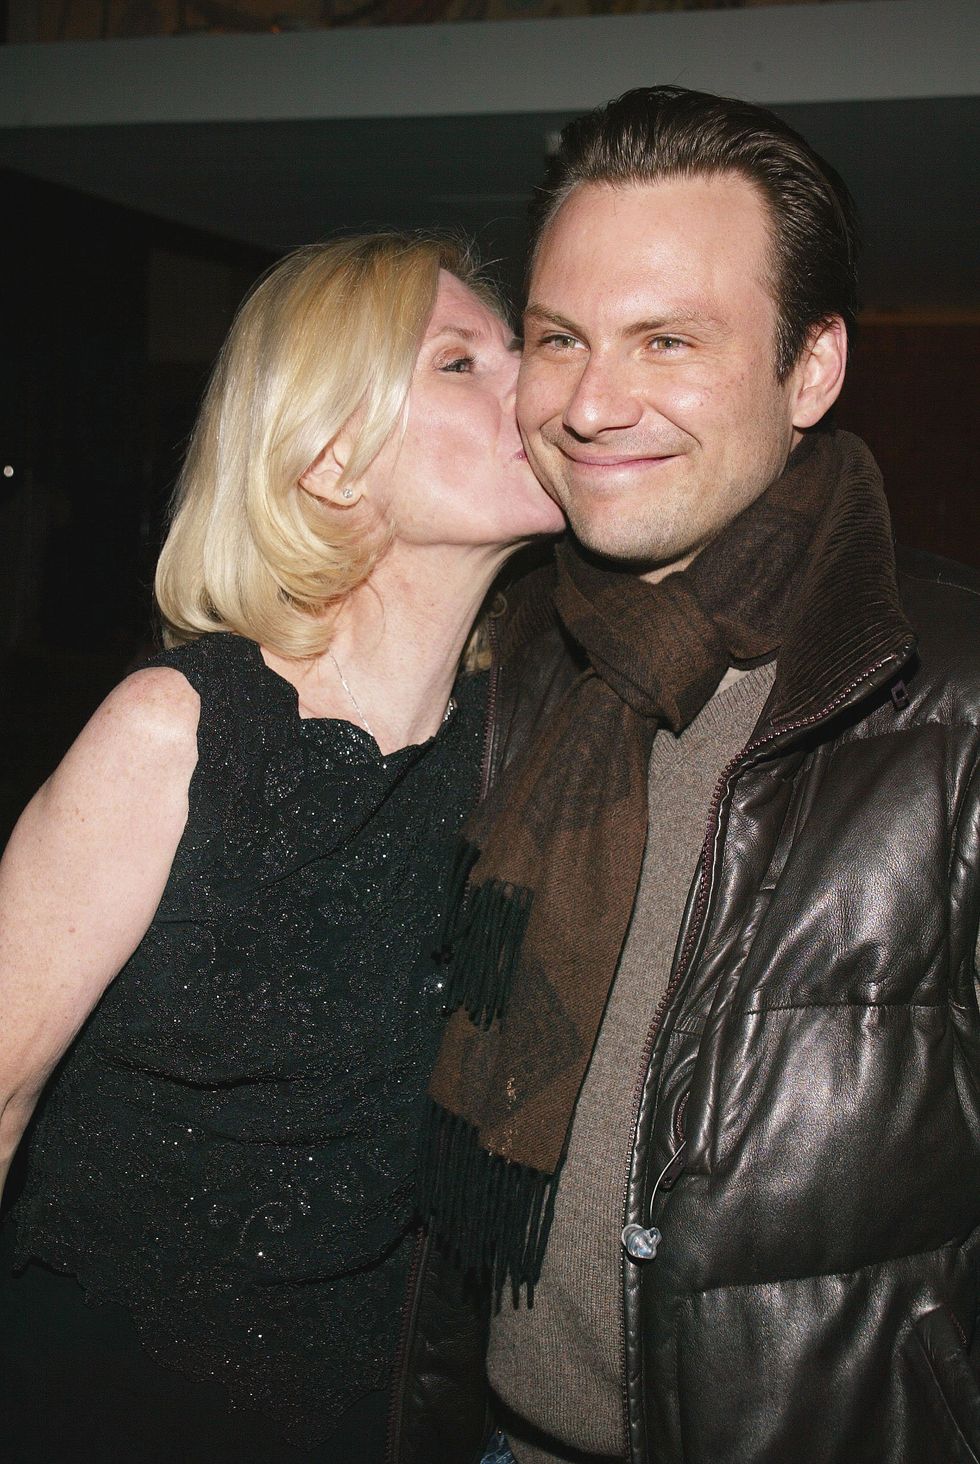 Mary Jo Slater, Christian Slater during party for the opening night of 'The Glass Menagerie' in 2005